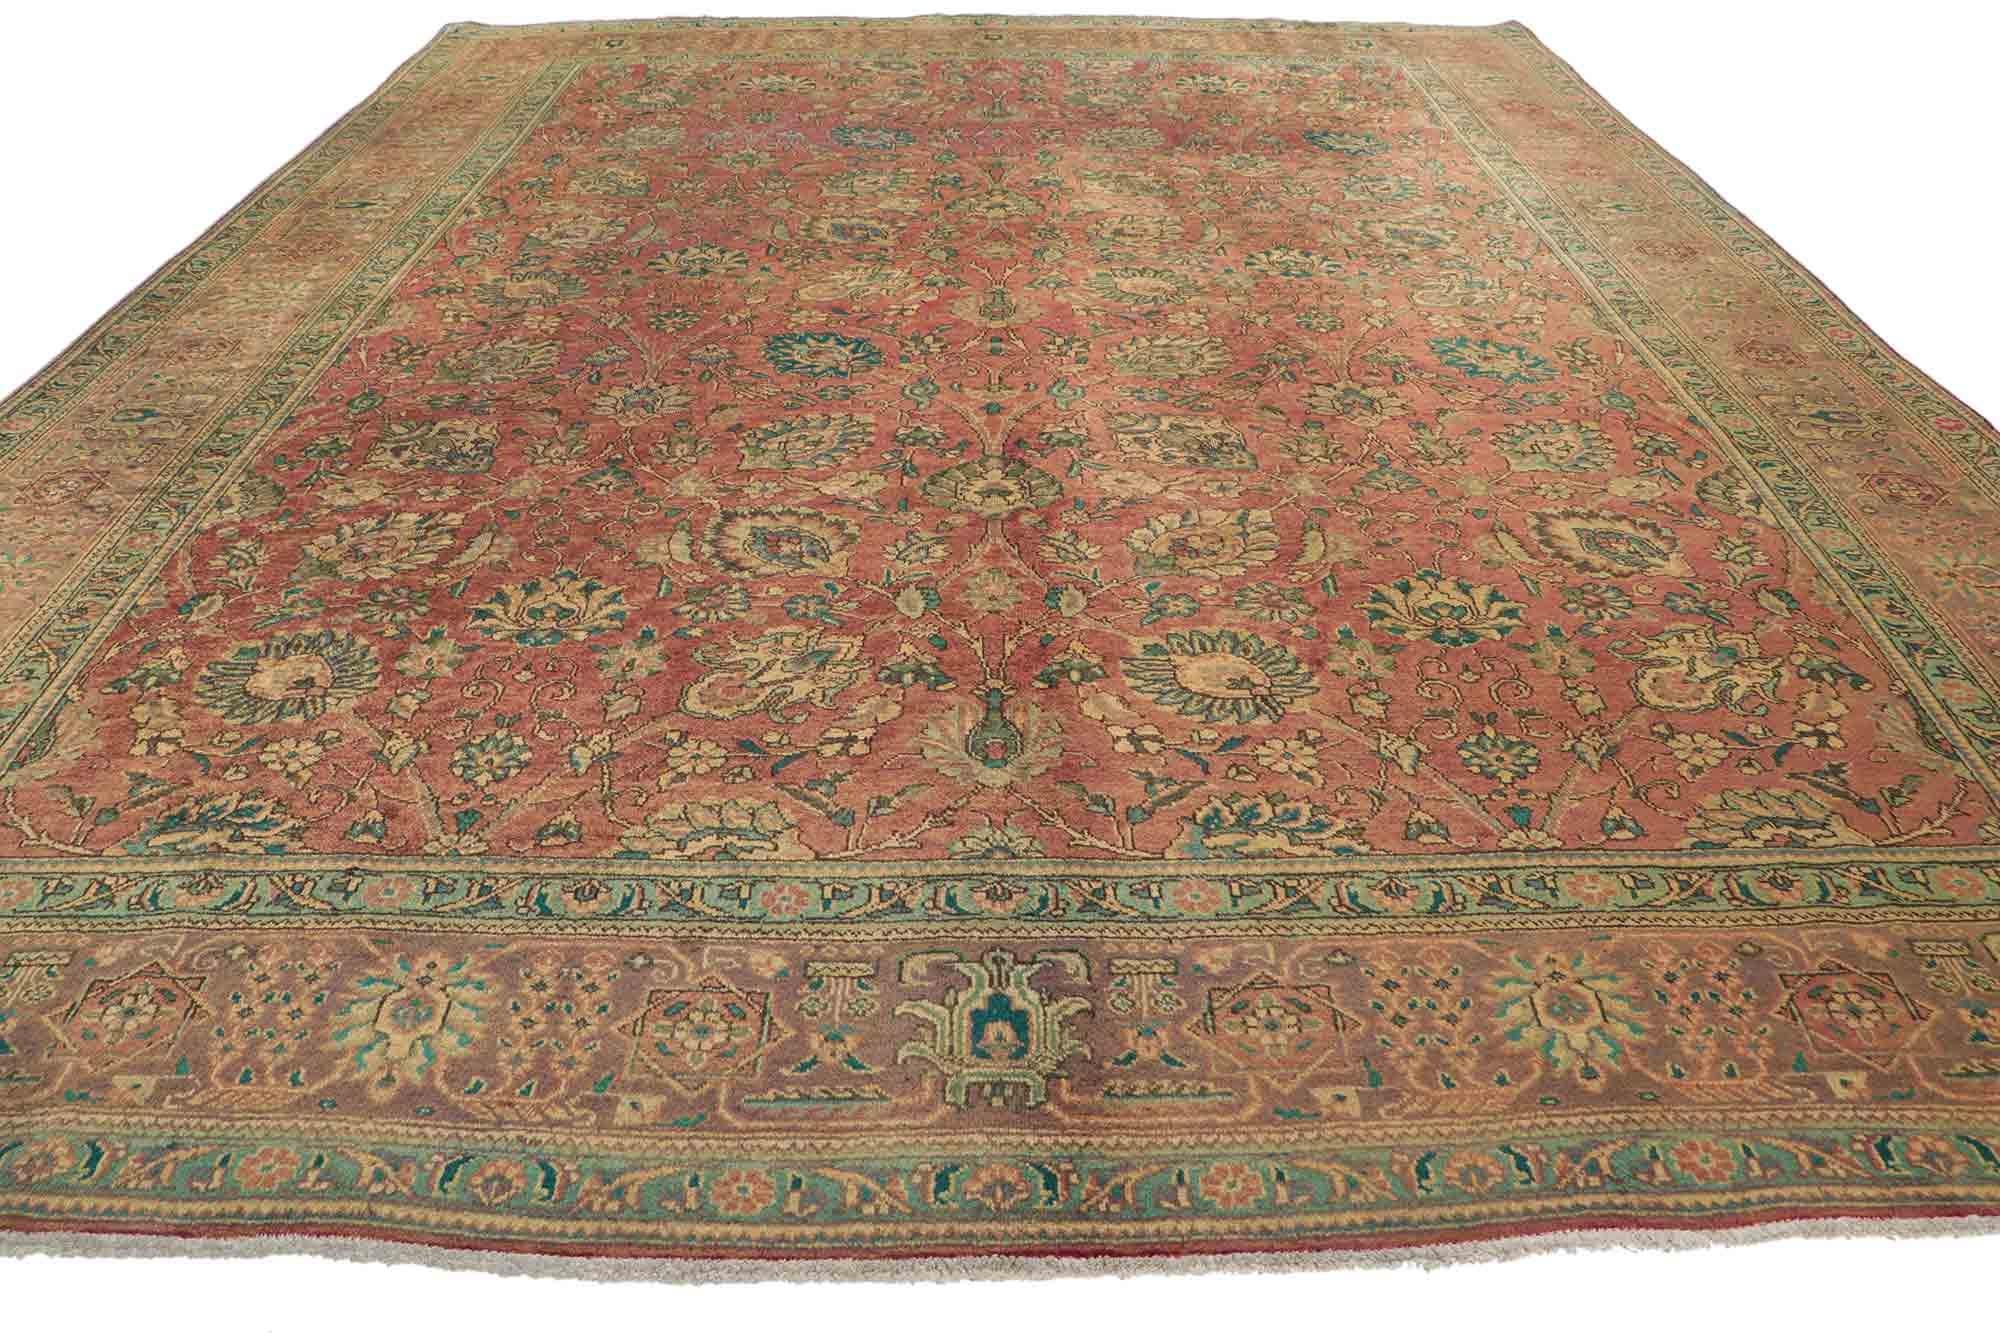 Vintage Persian Tabriz Area Rug with Traditional Style In Good Condition For Sale In Dallas, TX